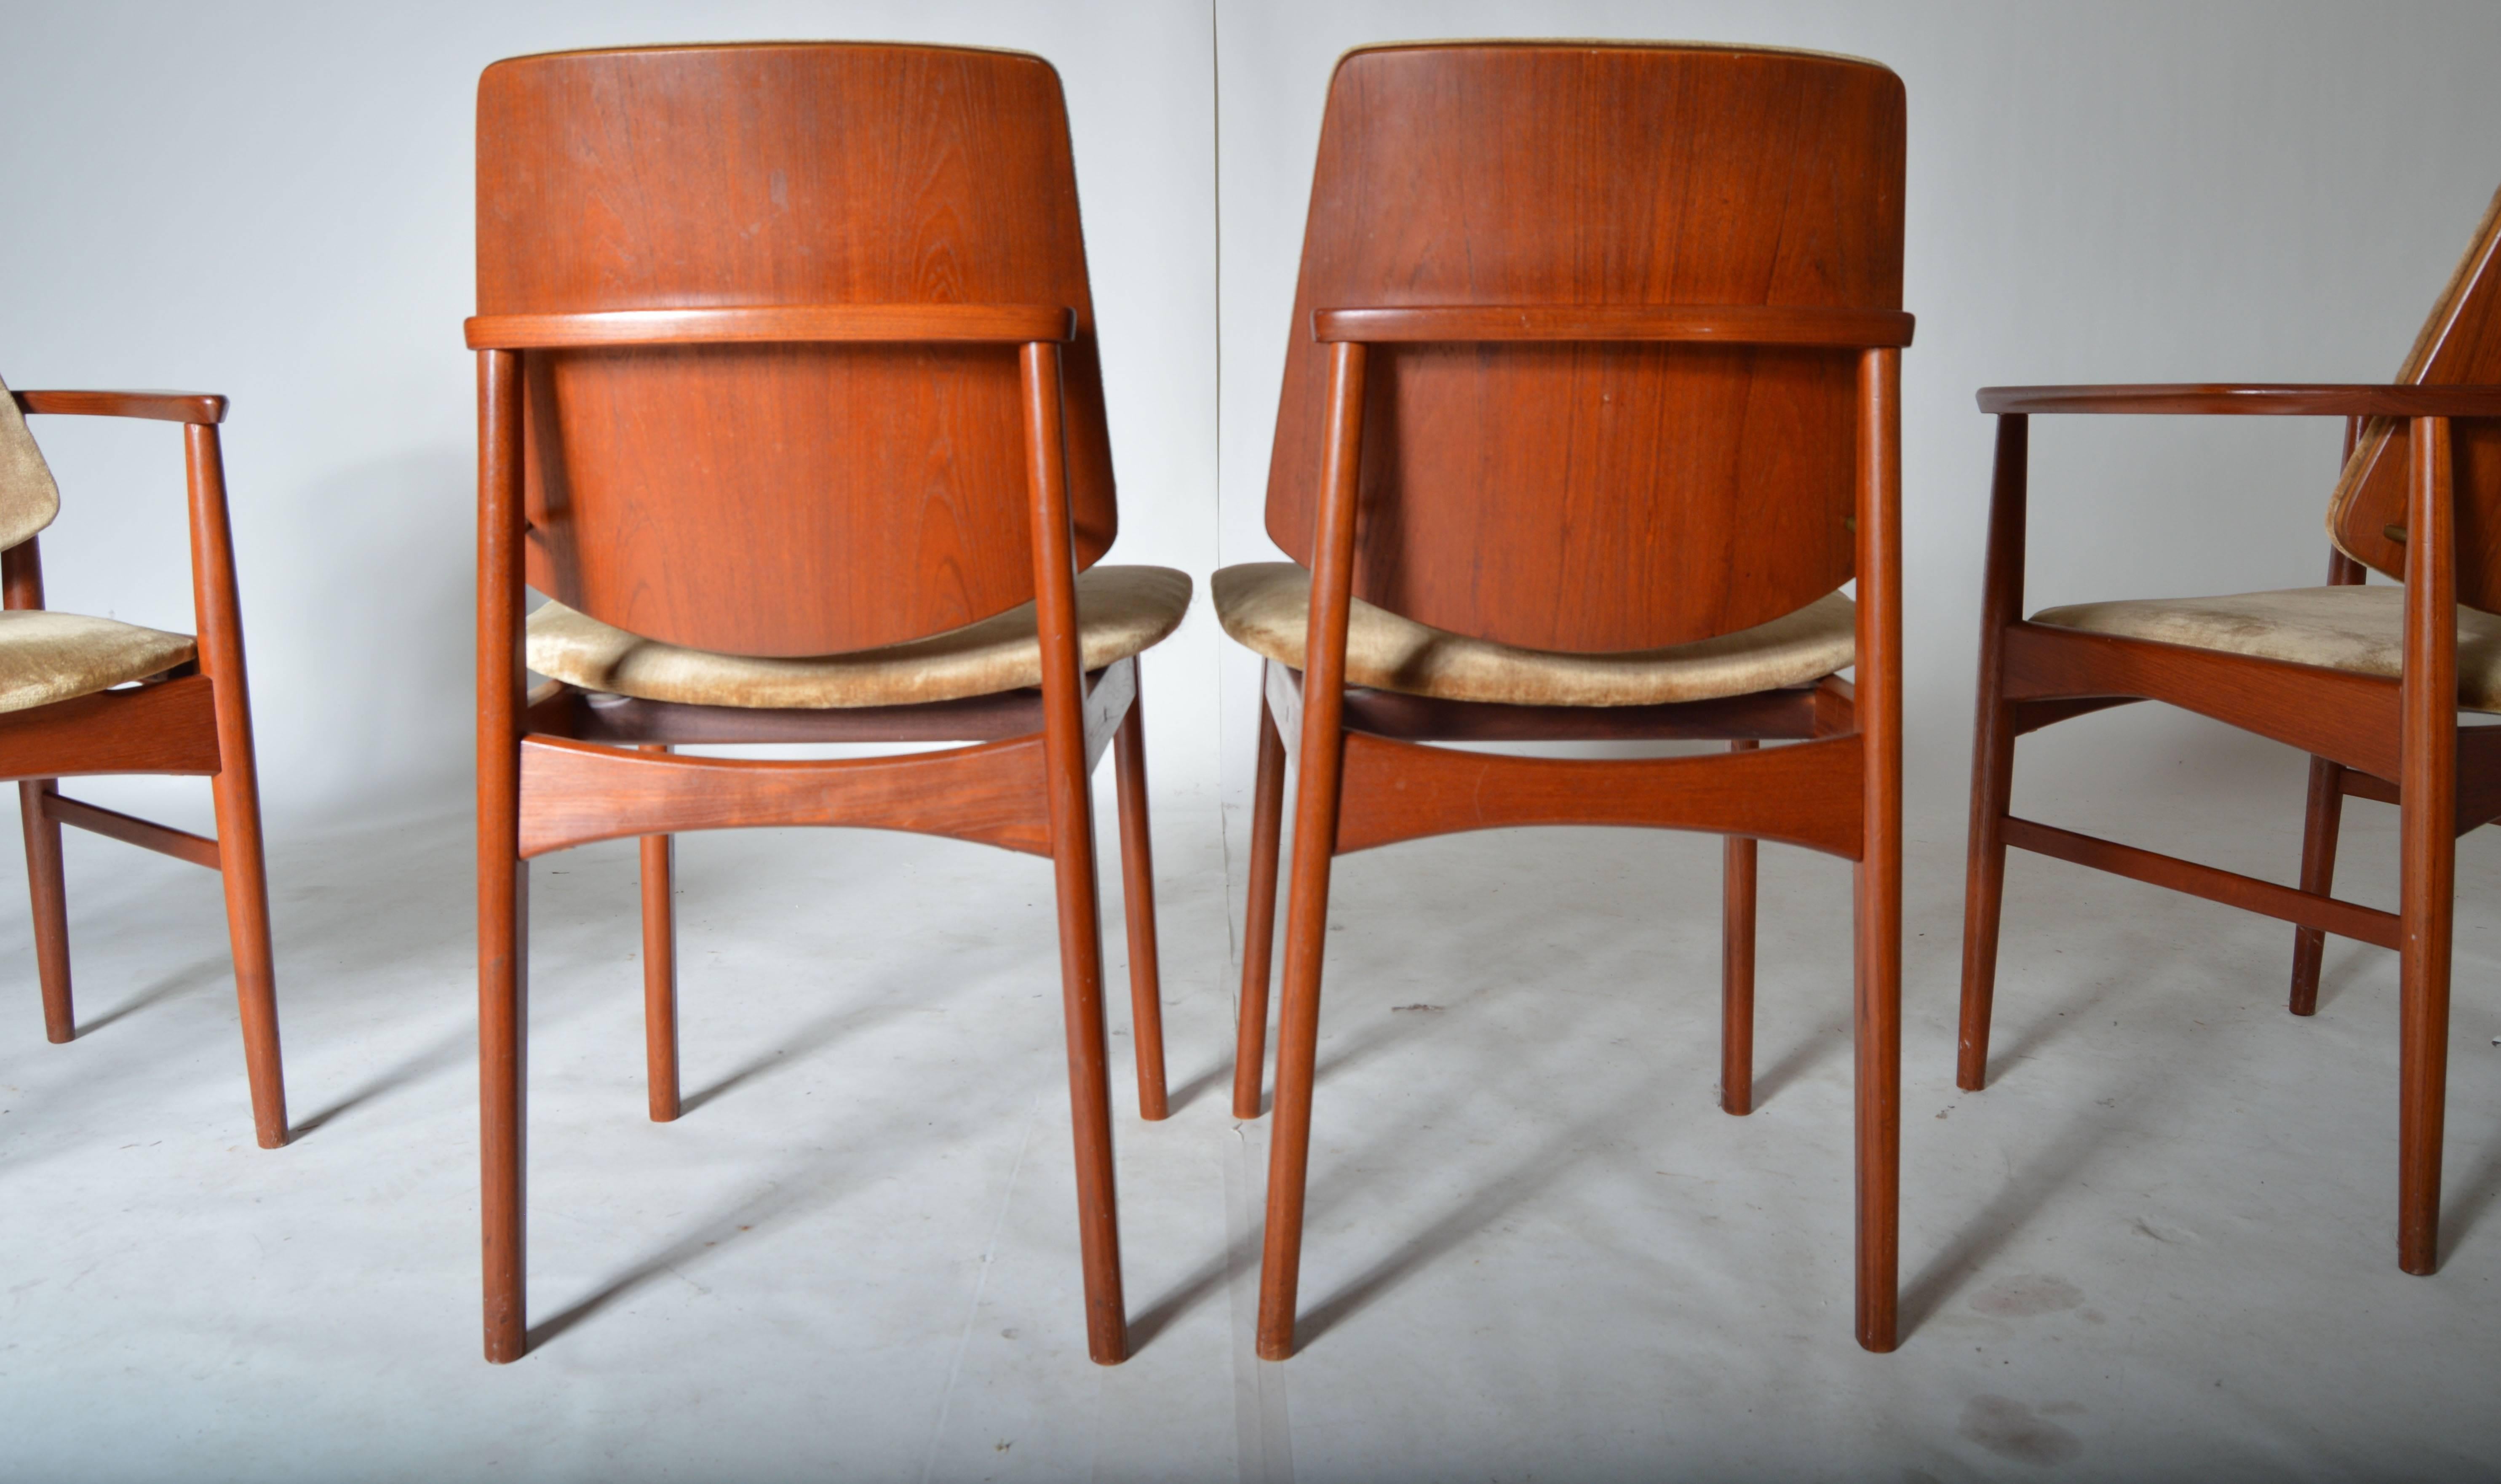 A beautiful set of eight teak framed dining chairs having bentwood teak backs and seats with smooth polyester upholstery. Stunning.